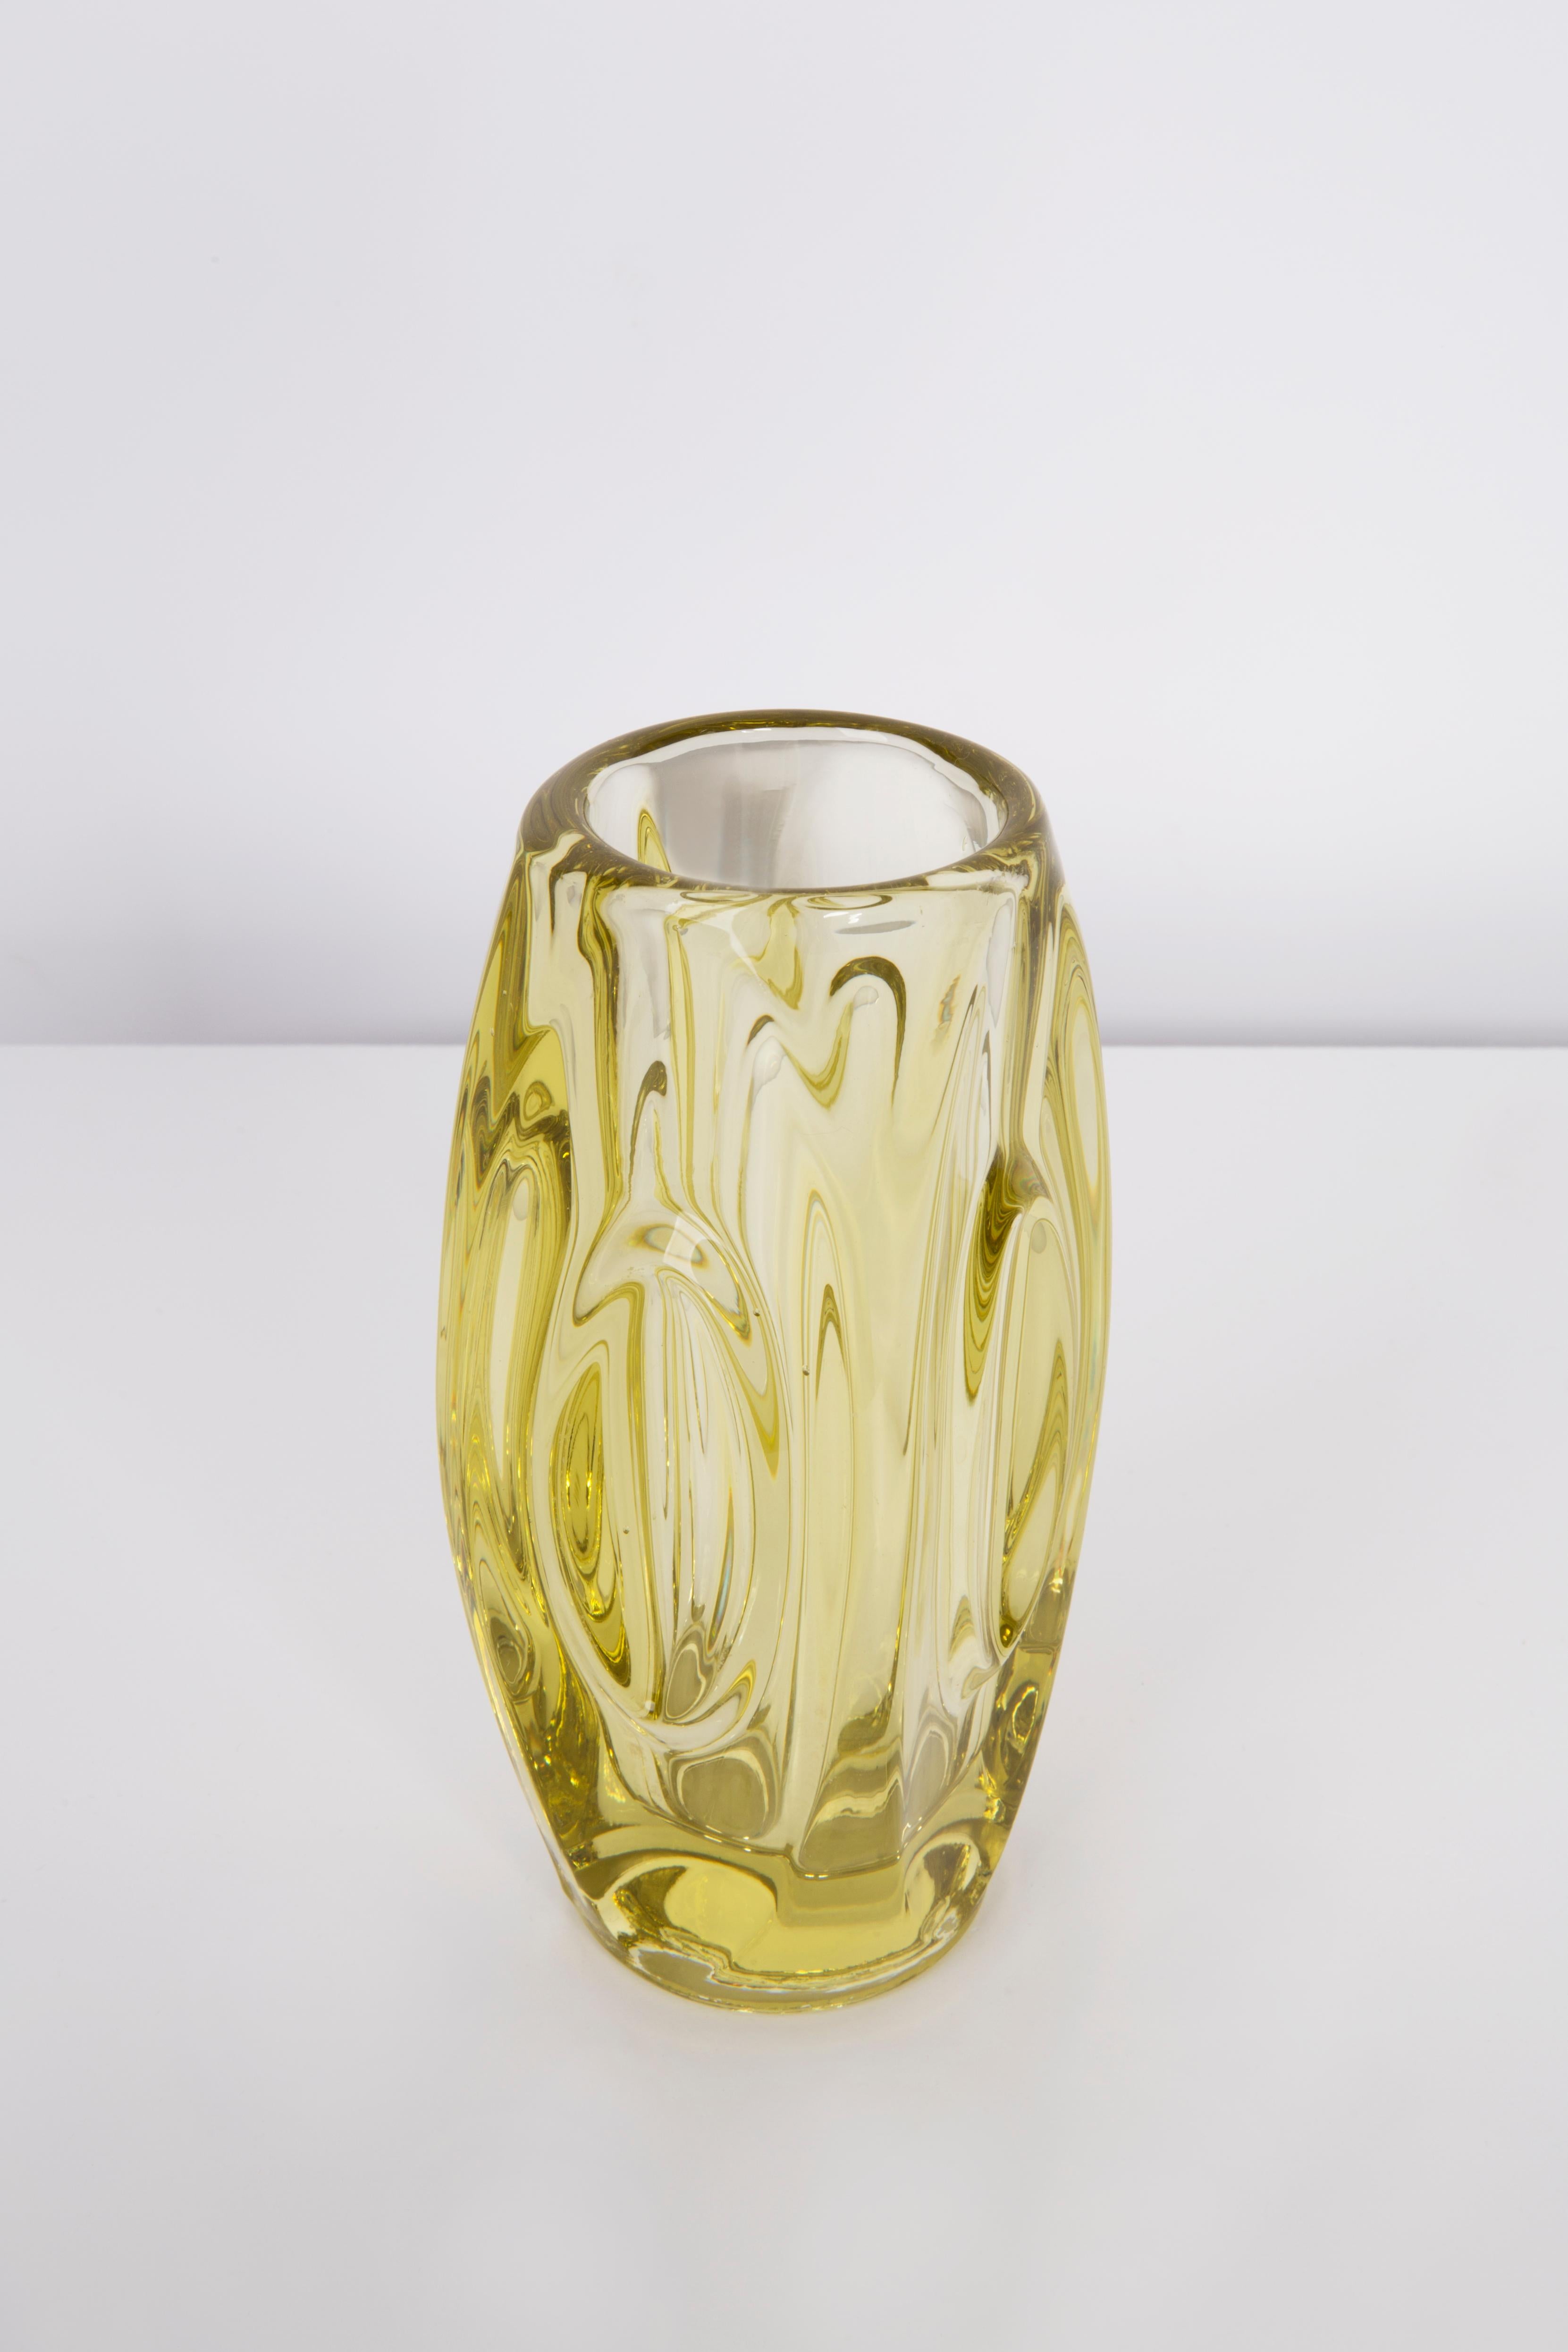 Vase by Vladislav Urban - Czechoslovakian glass designer. Produced in 1960s.

Pressed glass in perfect condition.
The vase looks like it has just been taken out of the box.
The picture reflects the color in which it presents live.

No jags,